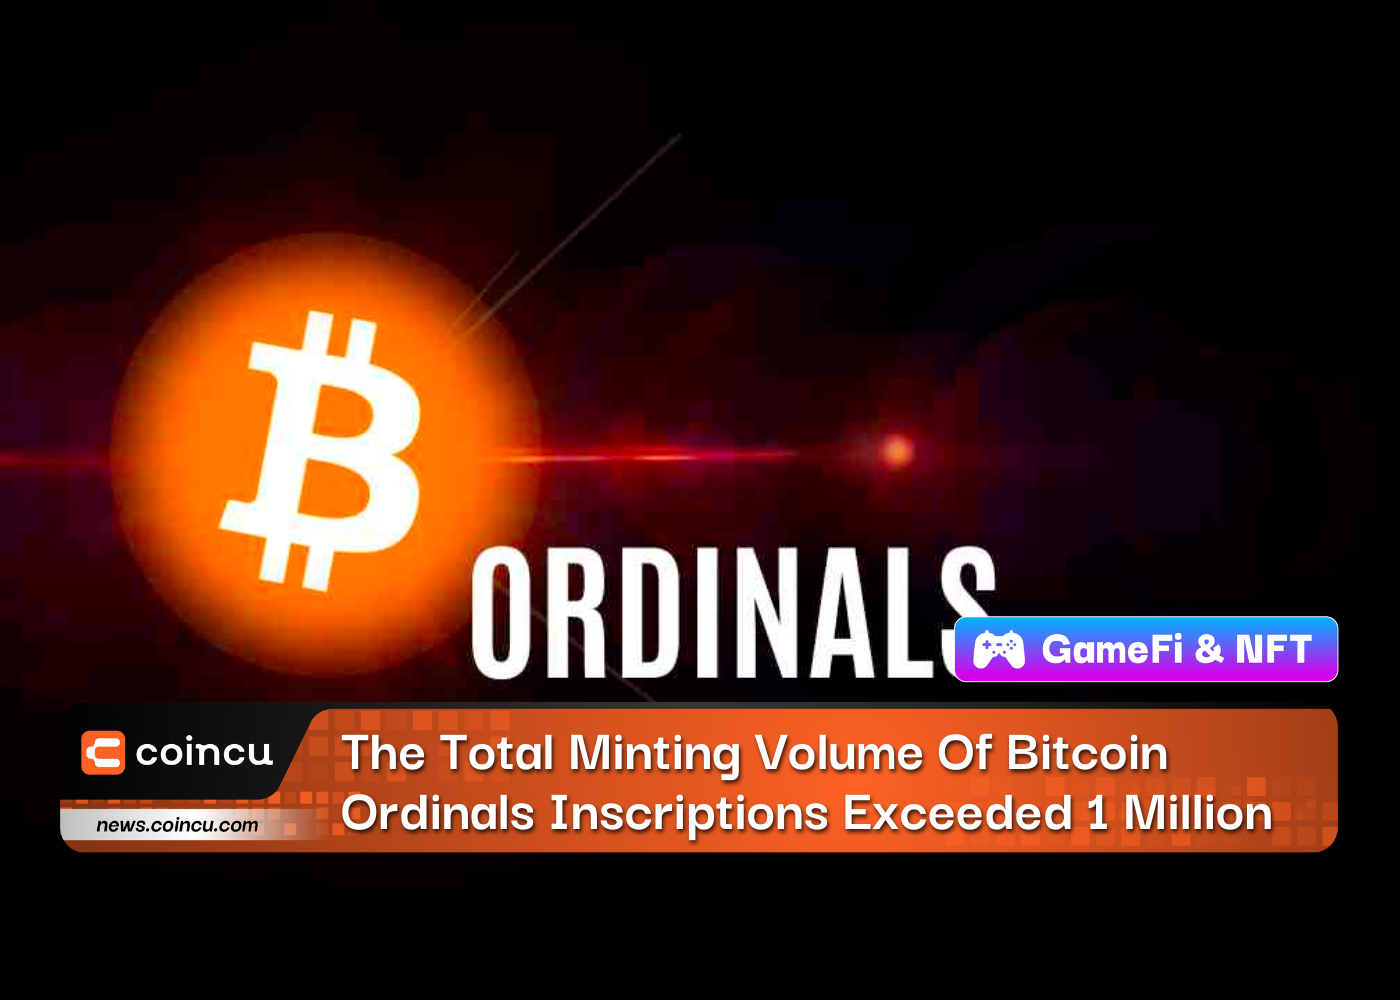 The Total Minting Volume Of Bitcoin Ordinals Inscriptions Exceeded 1 Million